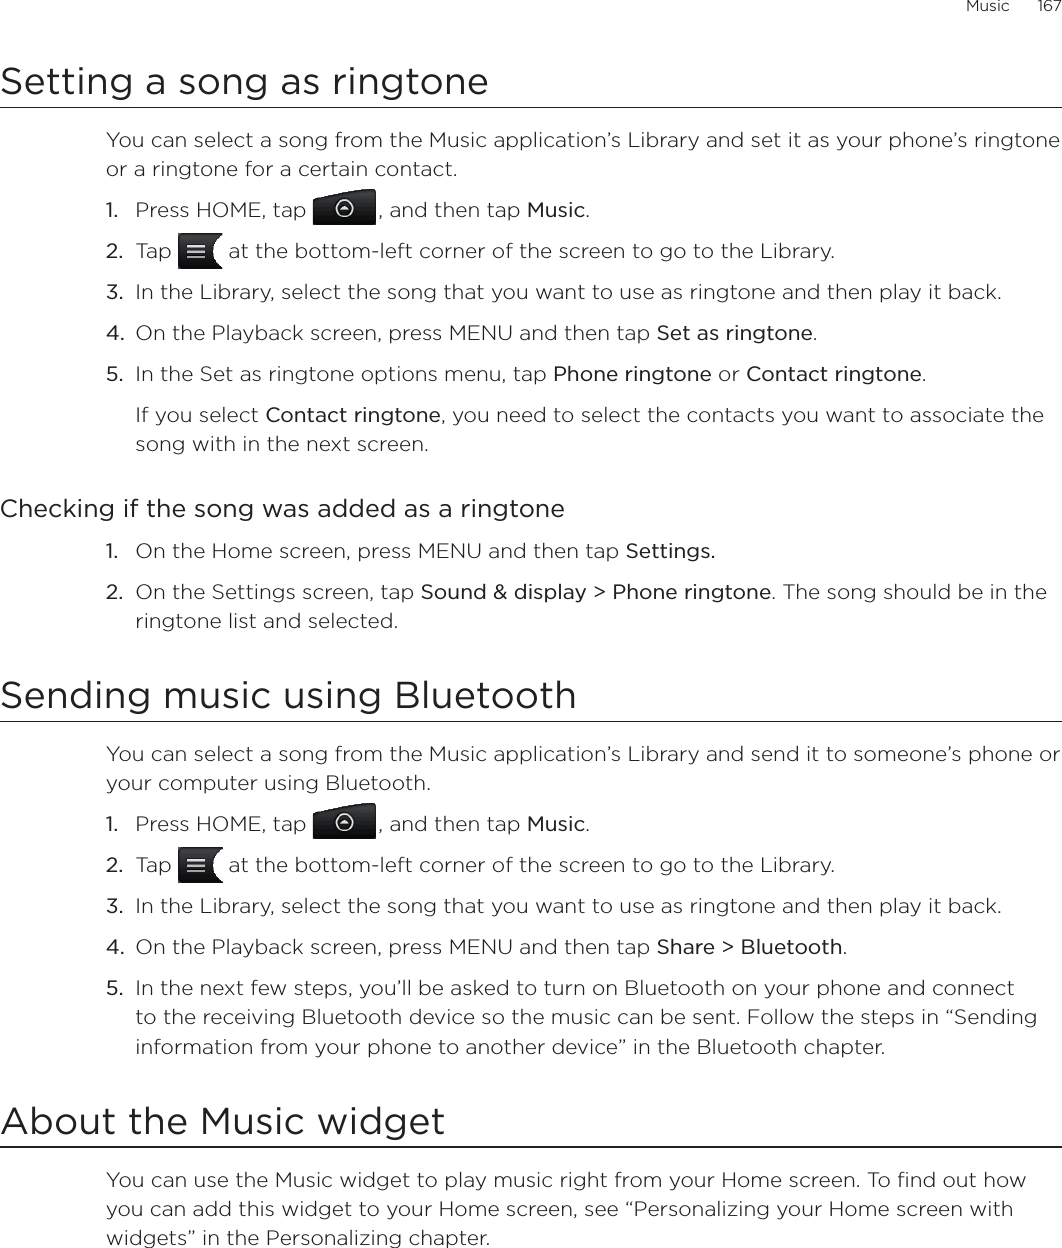 Music      167Setting a song as ringtoneYou can select a song from the Music application’s Library and set it as your phone’s ringtone or a ringtone for a certain contact.Press HOME, tap , and then tap Music.Tap   at the bottom-left corner of the screen to go to the Library.In the Library, select the song that you want to use as ringtone and then play it back.On the Playback screen, press MENU and then tap Set as ringtone.In the Set as ringtone options menu, tap Phone ringtone or Contact ringtone.If you select Contact ringtone, you need to select the contacts you want to associate the song with in the next screen.Checking if the song was added as a ringtoneOn the Home screen, press MENU and then tap Settings.On the Settings screen, tap Sound &amp; display &gt; Phone ringtone. The song should be in the ringtone list and selected. Sending music using BluetoothYou can select a song from the Music application’s Library and send it to someone’s phone or your computer using Bluetooth.Press HOME, tap , and then tap Music.Tap   at the bottom-left corner of the screen to go to the Library.In the Library, select the song that you want to use as ringtone and then play it back.On the Playback screen, press MENU and then tap Share &gt; Bluetooth.In the next few steps, you’ll be asked to turn on Bluetooth on your phone and connect to the receiving Bluetooth device so the music can be sent. Follow the steps in “Sending information from your phone to another device” in the Bluetooth chapter.About the Music widgetYou can use the Music widget to play music right from your Home screen. To find out how you can add this widget to your Home screen, see “Personalizing your Home screen with widgets” in the Personalizing chapter.1.2.3.4.5.1.2.1.2.3.4.5.